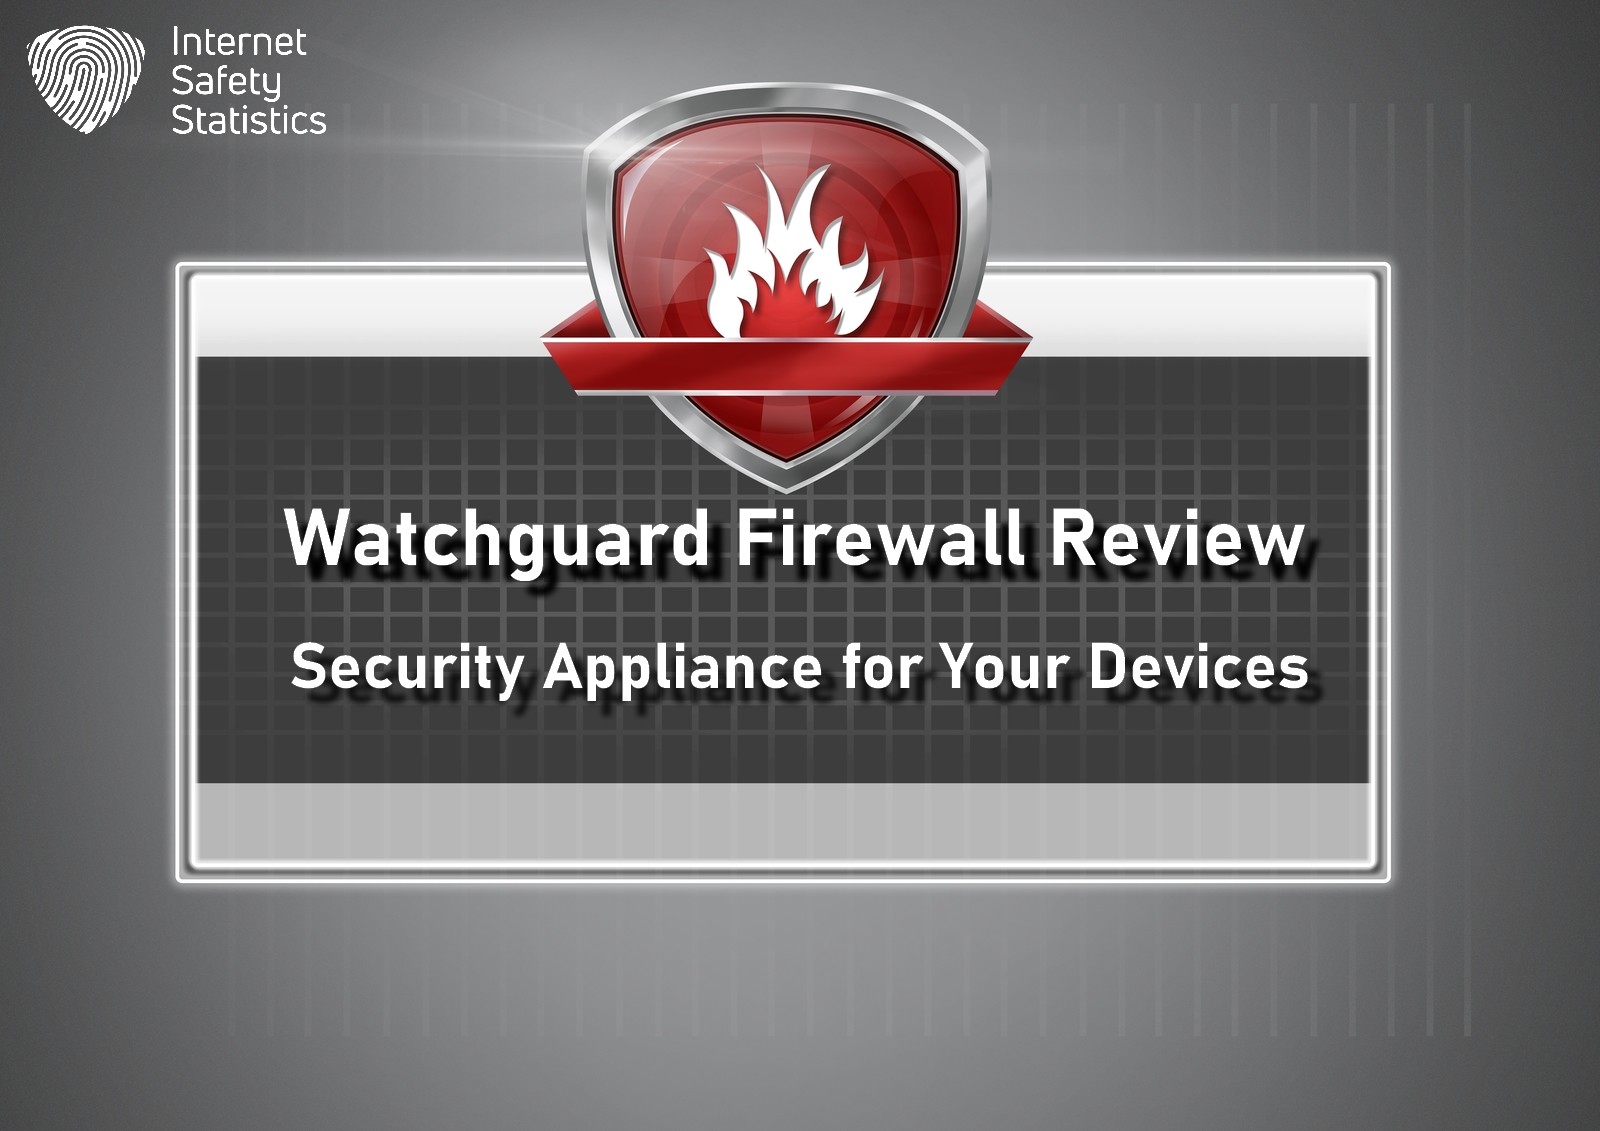 WatchGuard Firewall Review: Security Appliance for Your Devices